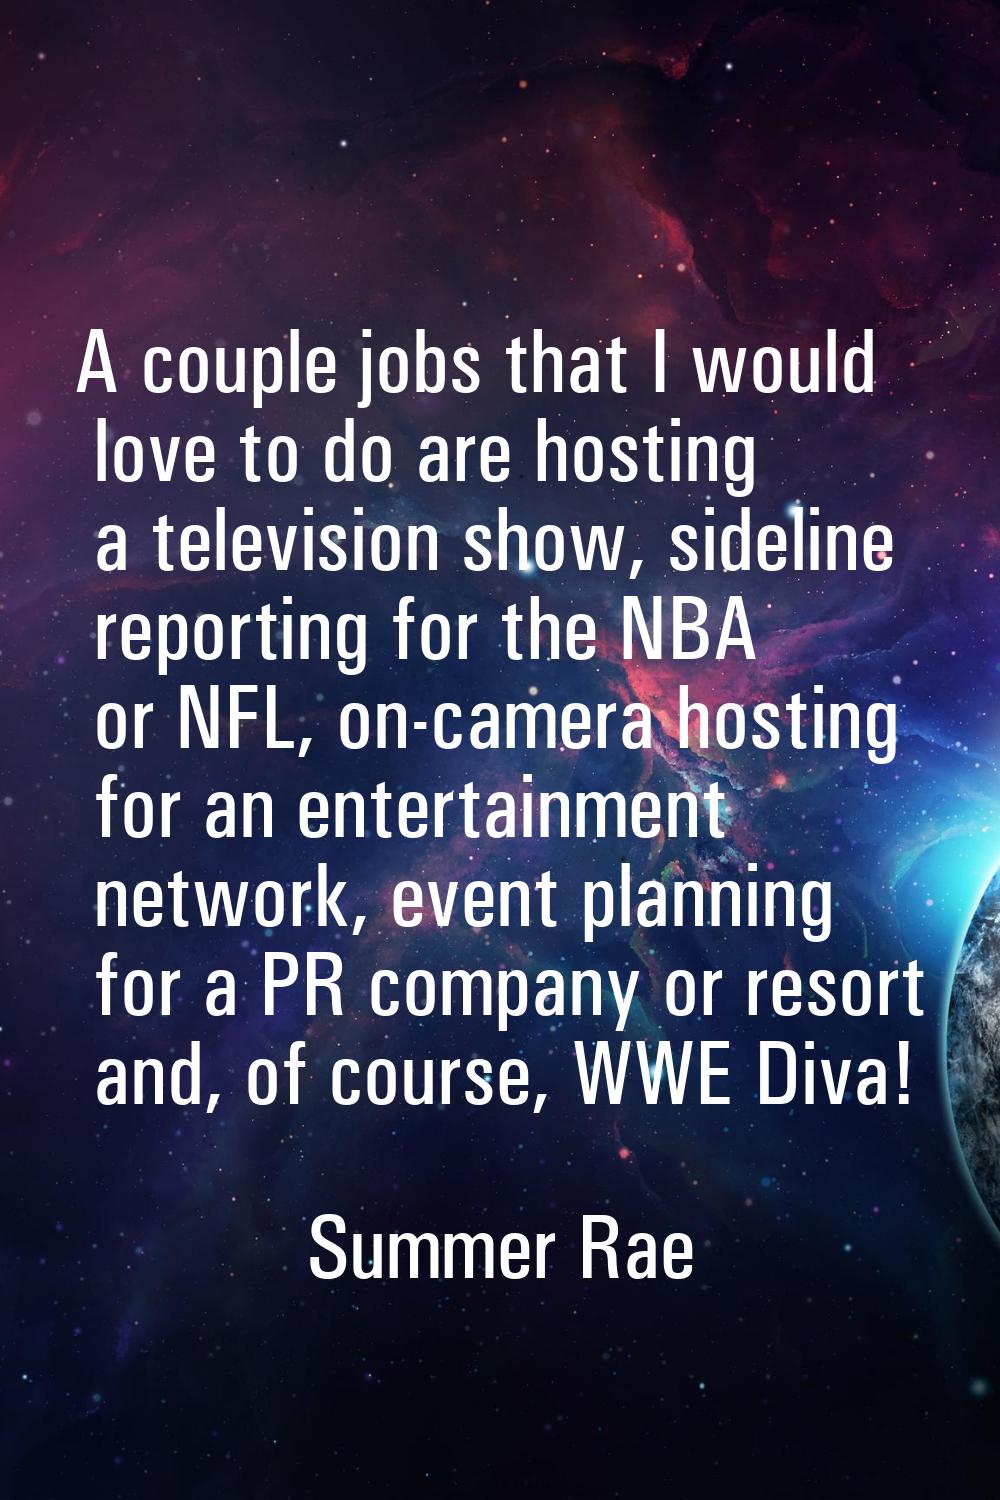 A couple jobs that I would love to do are hosting a television show, sideline reporting for the NBA